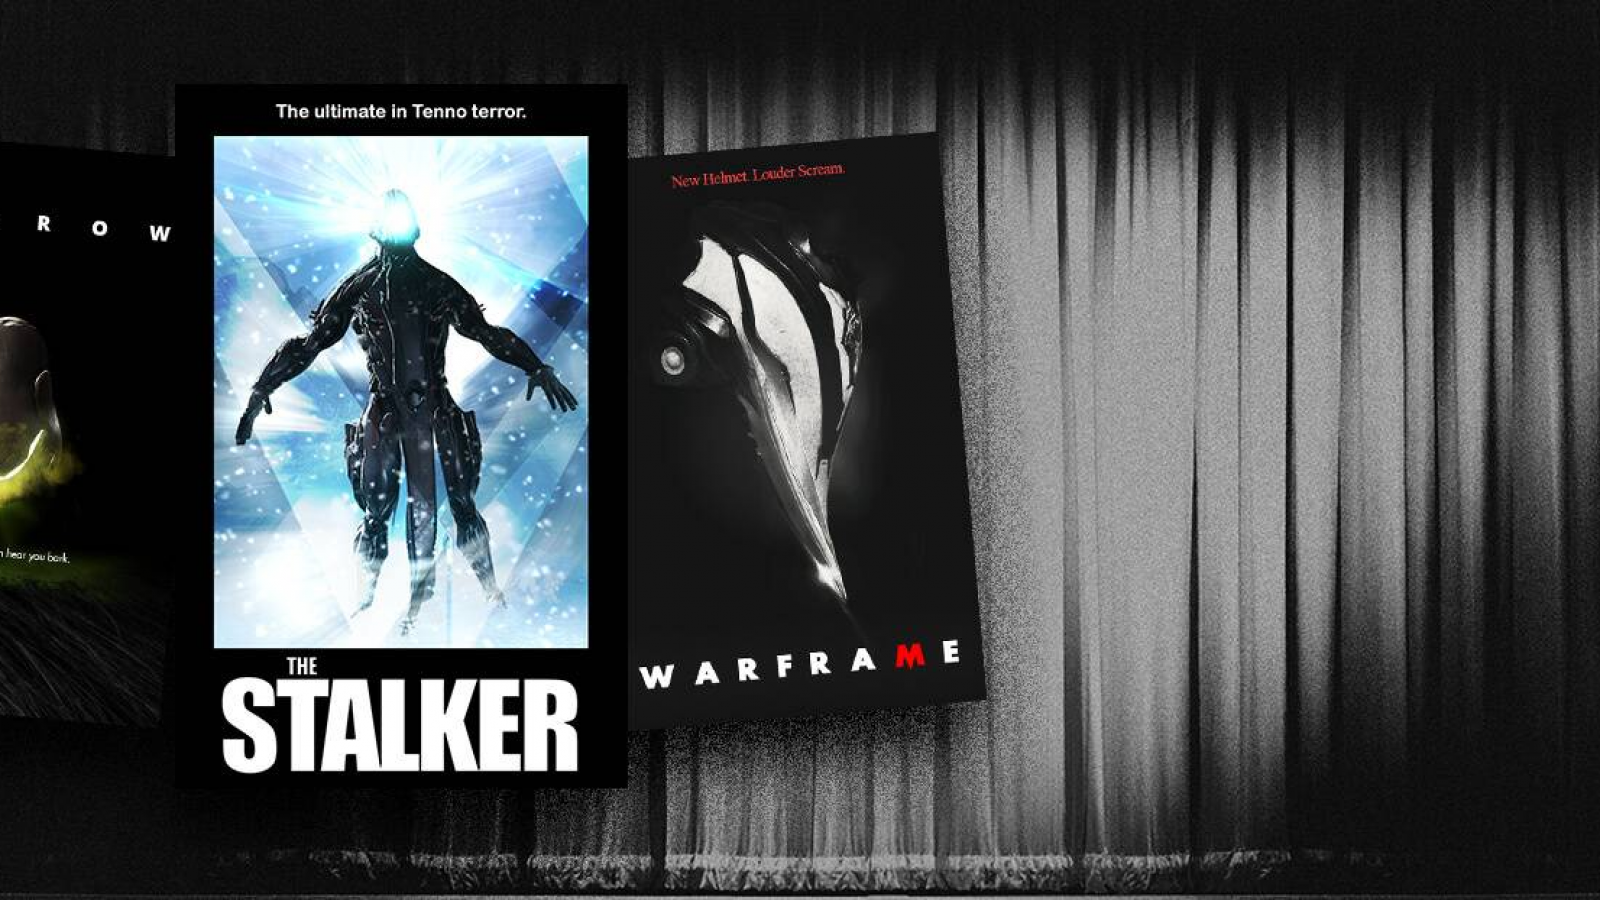 Design a Warframe Poster and You Could Win!